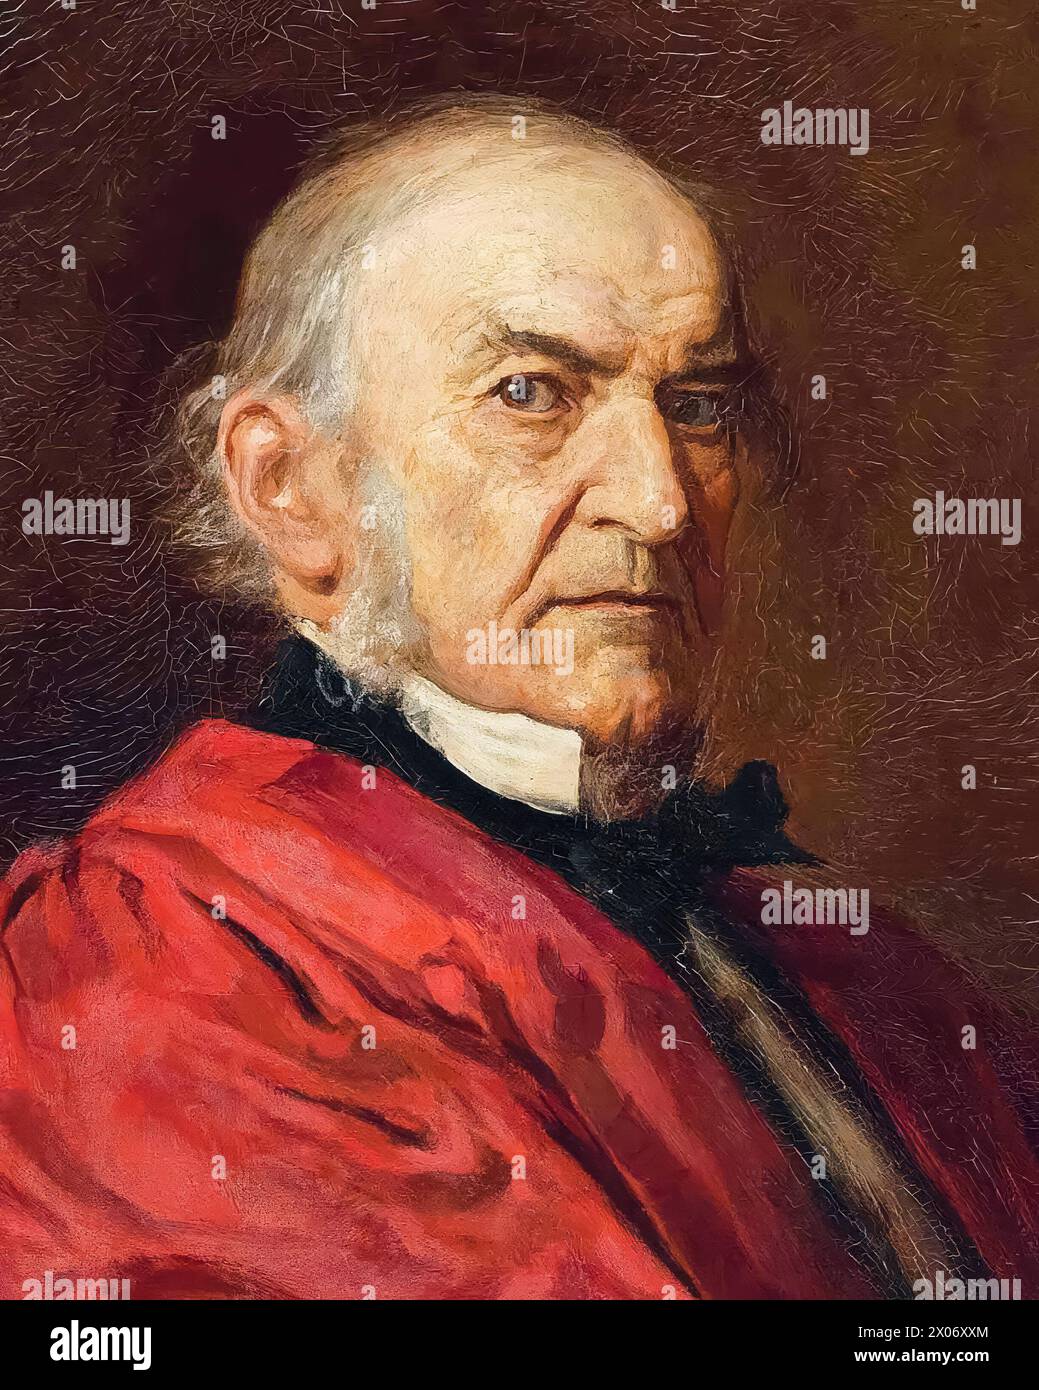 William Gladstone (William Ewart Gladstone, 1809-1898), Liberal politician and four times Prime Minister of the United Kingdom 1868-1874, 1880-1885, Feb-Jul 1886, and 1892-1894, portrait painting in oil on canvas by C.H. Thompson after Sir John Everett Millais, 1884-1894 Stock Photo